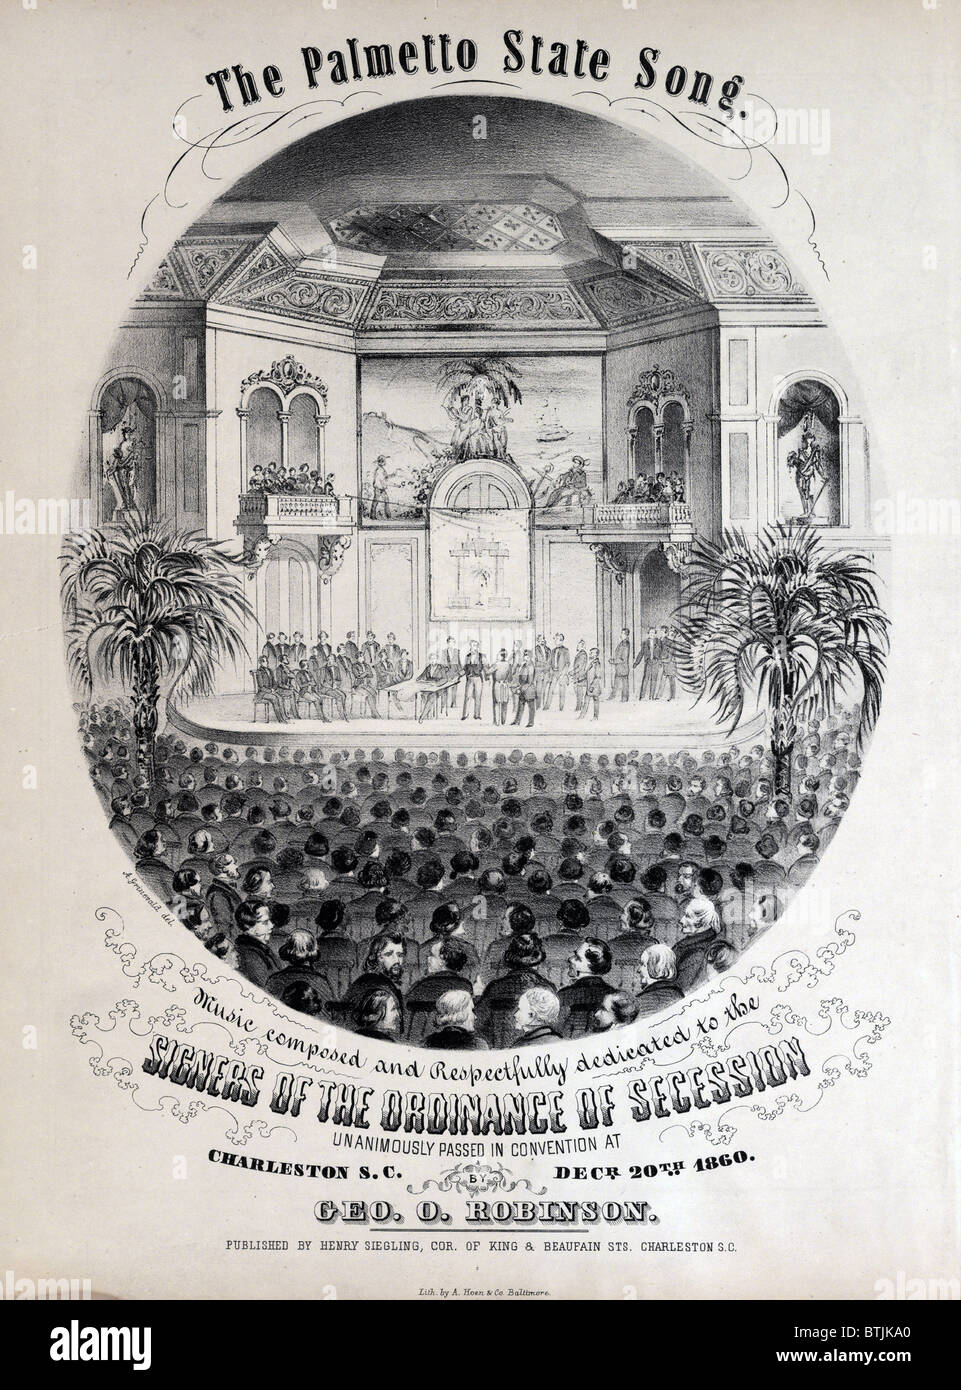 The Civil War, The Palmetto State song. South Carolina State convention signing of the Ordinance of Secession, December 20, 1860. Stock Photo